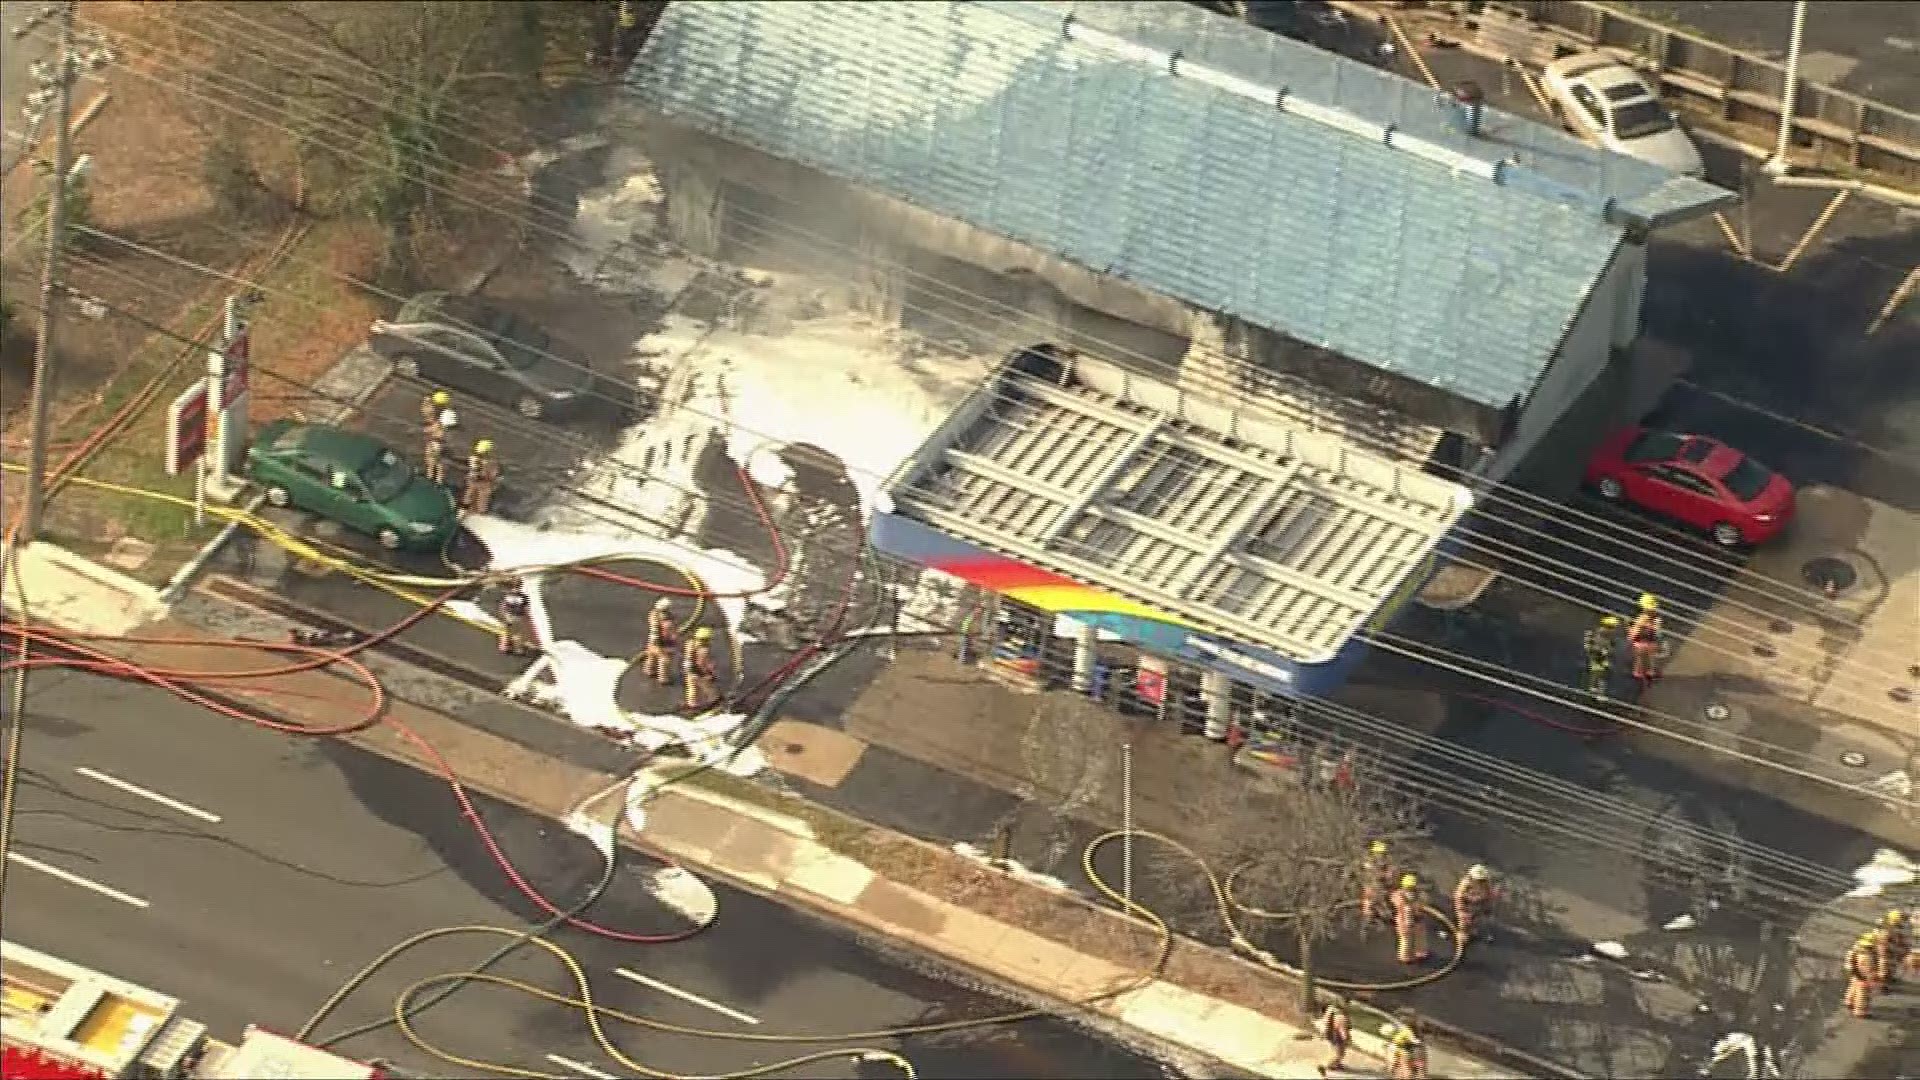 Montgomery County fire crews battled a 2-alarm gas station fire in Rockville, Maryland.